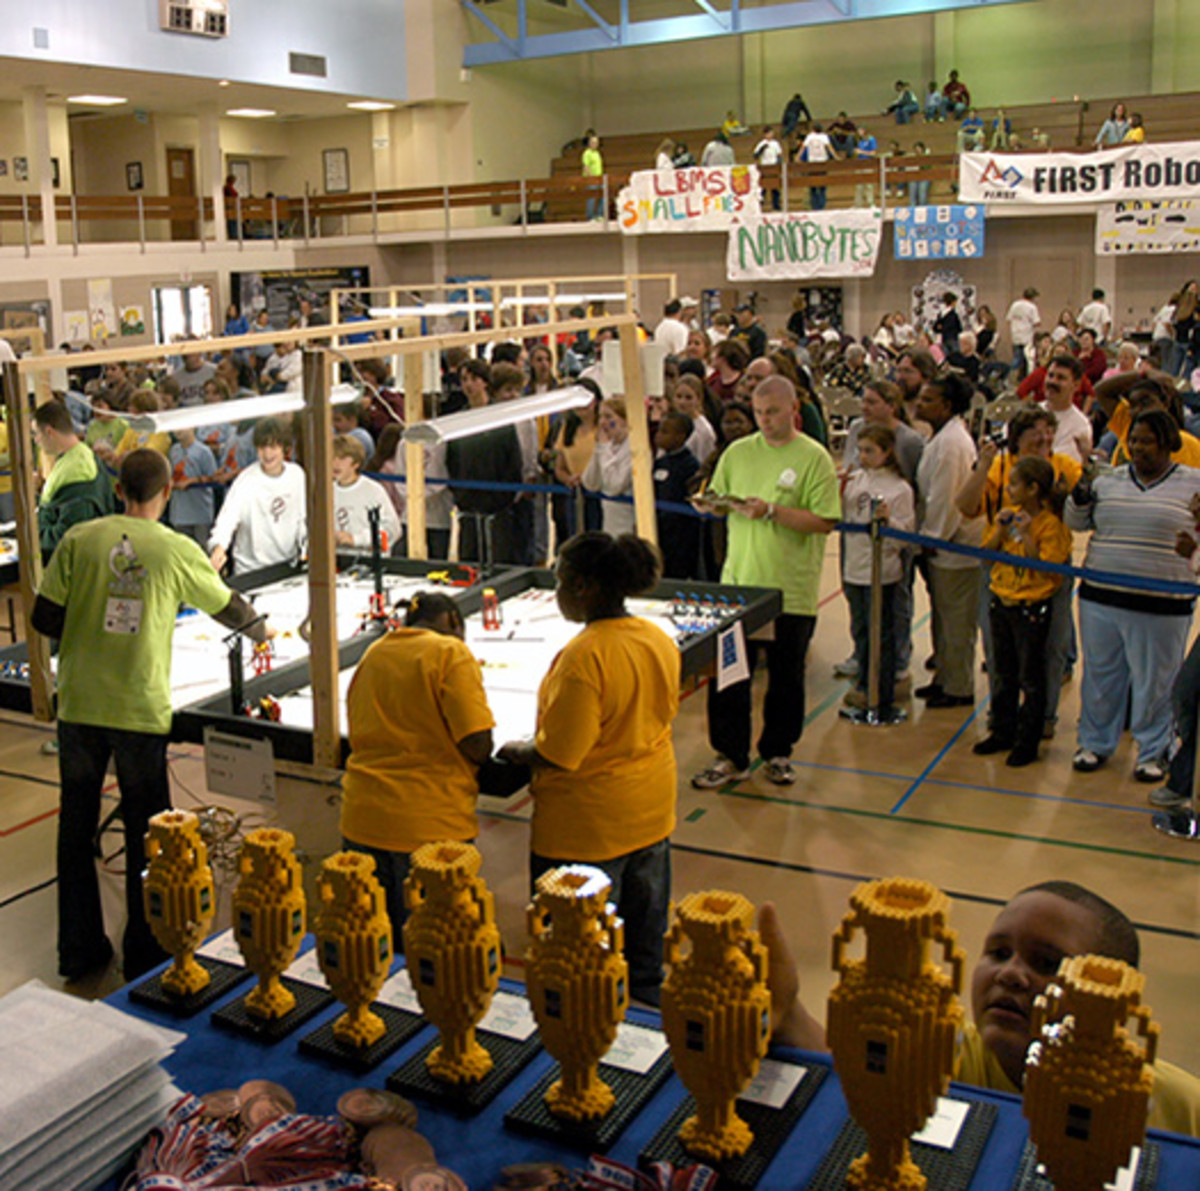 NASA - First LEGO League state championship, December 2006 at Mississippi Gulf Coast Community College 